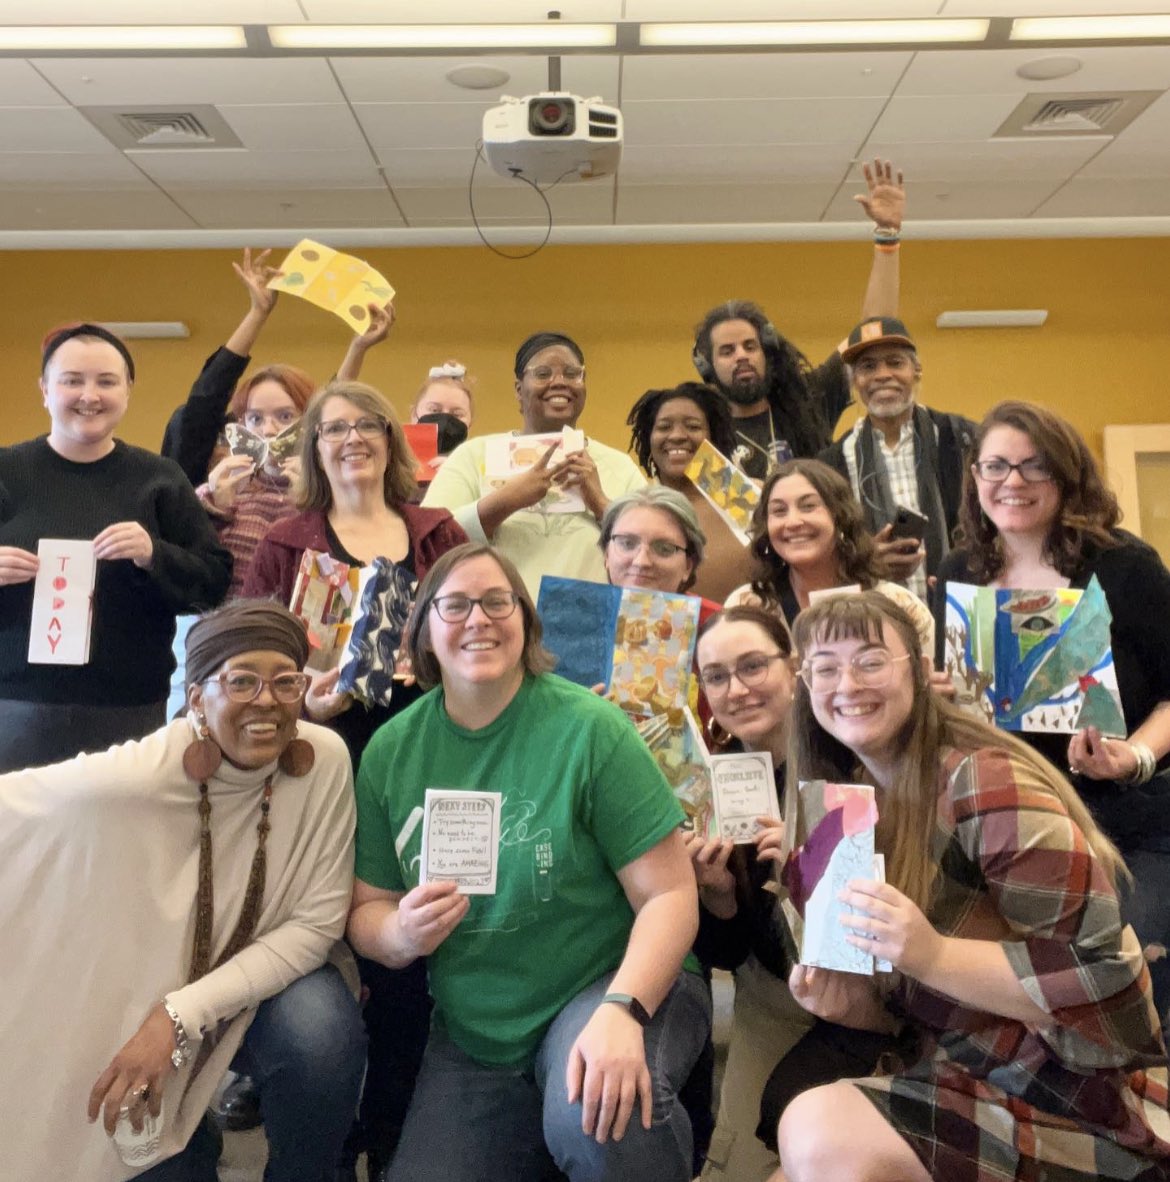 Last week we had a blast with @jennyogradybookarts and @partlow_art at our Book Arts Workshop! 📚🤗 Thank you to everyone you came to craft with us! Stay tuned for future workshop events! 

#bookarts #ubalt #writingcommunity #artcommunity